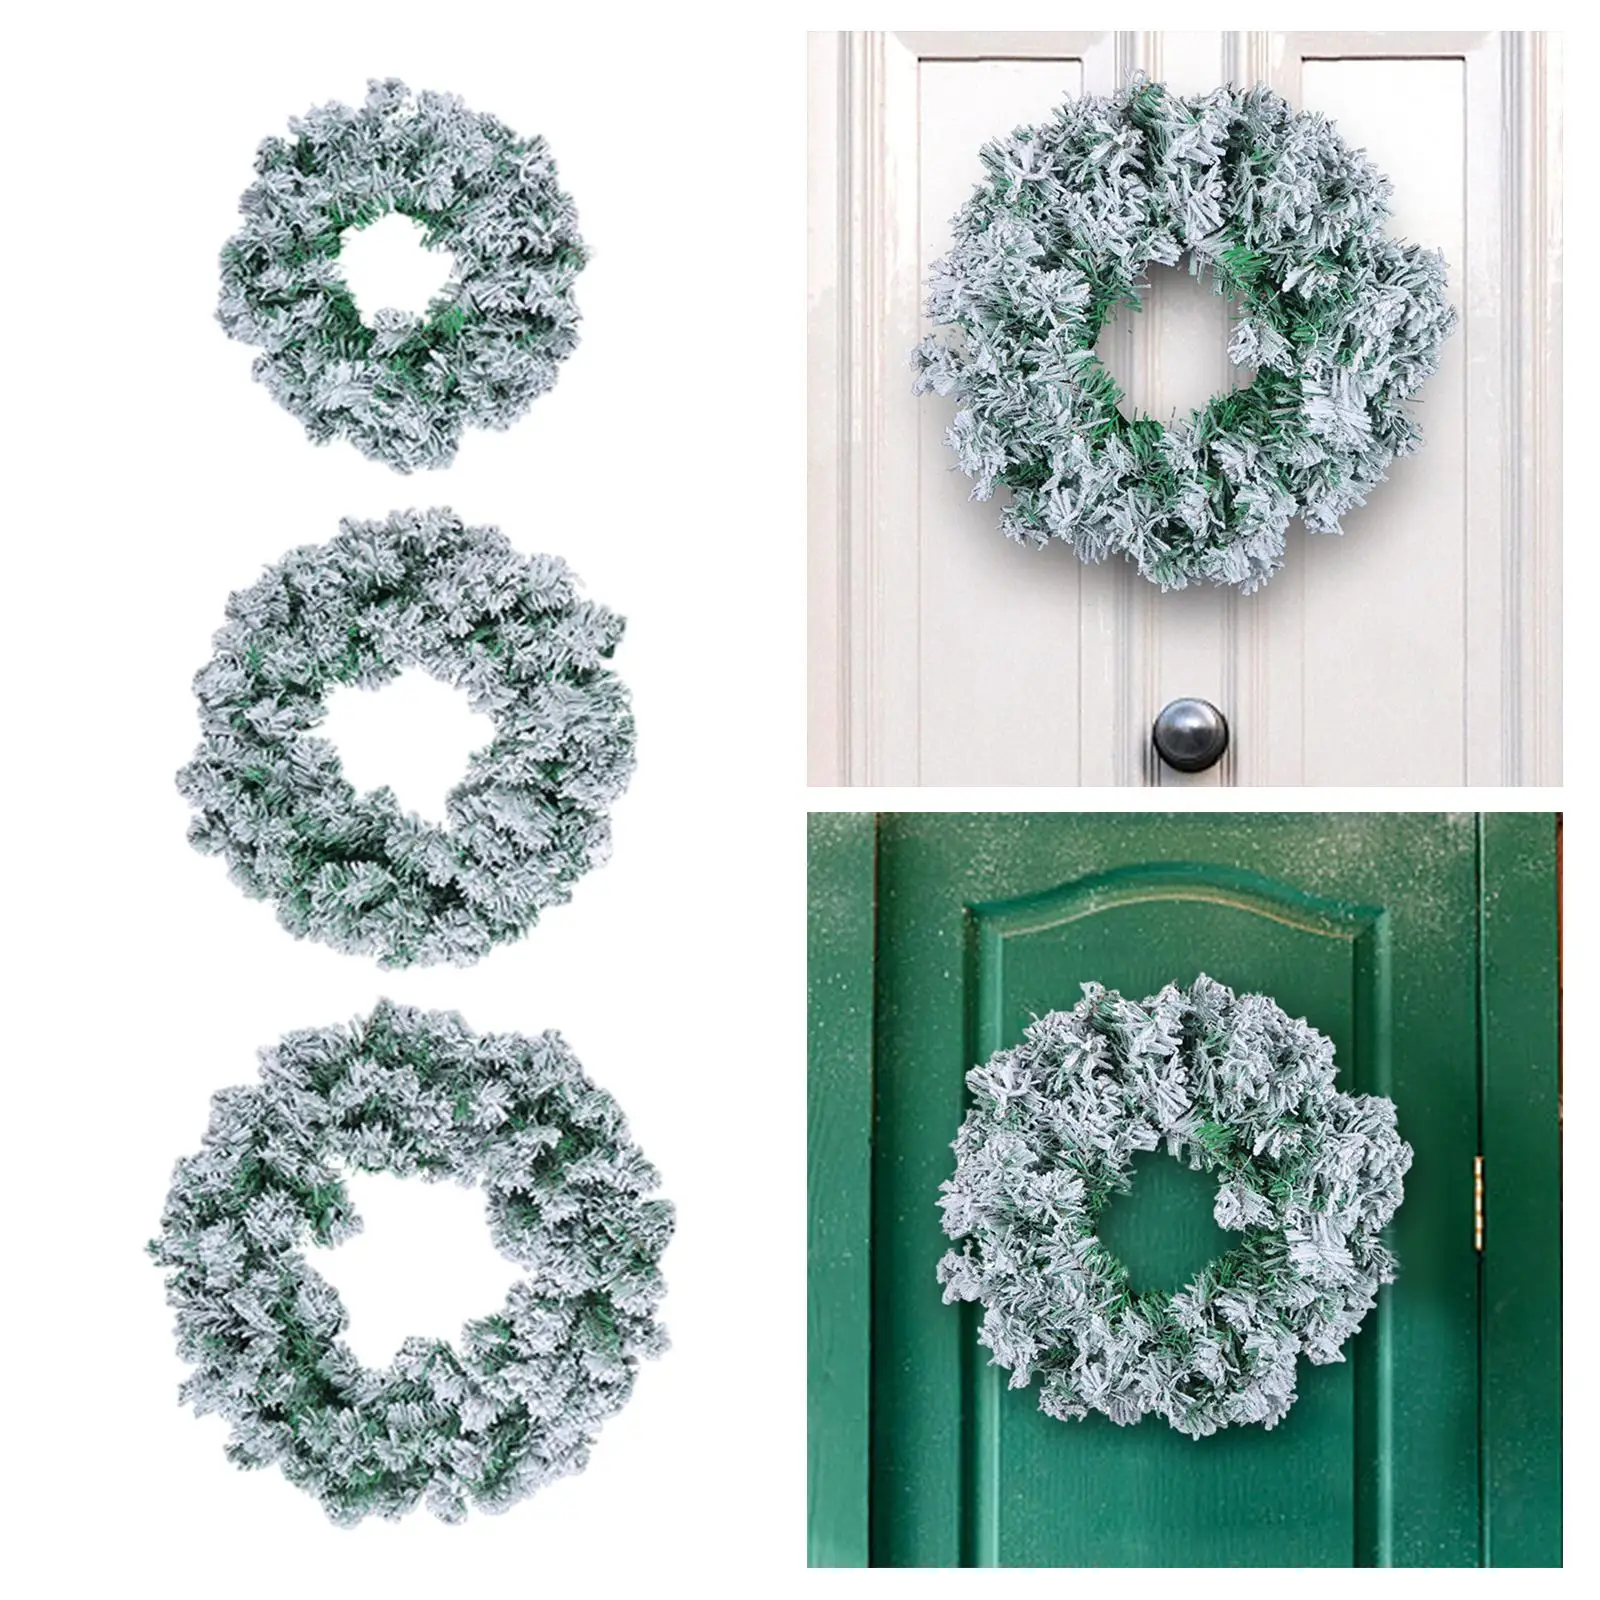 Artificial Snowy Christmas Wreath Xmas Decor Realistic Green Hanging Ornament for Wall Holiday Indoor Outdoor Window Wedding